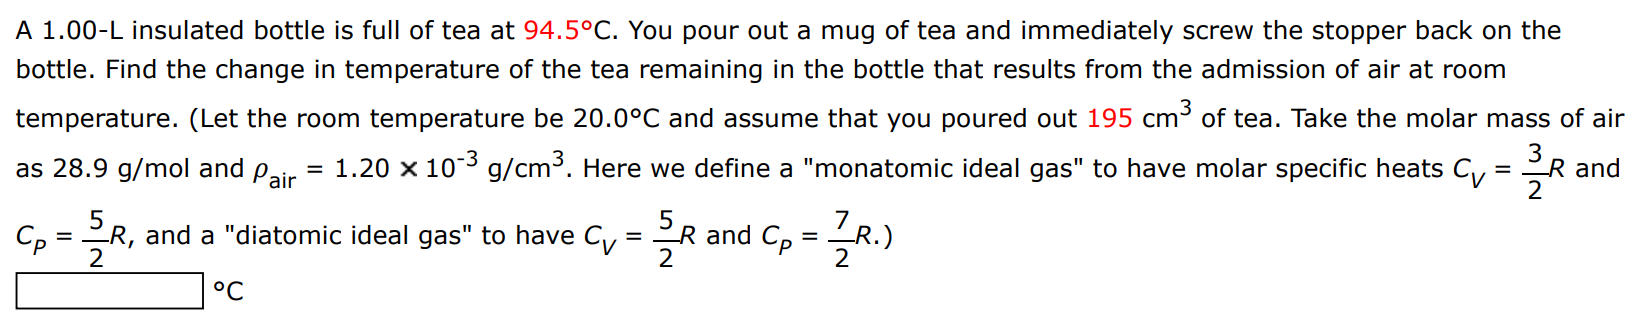 A 1.00−L insulated bottle is full of tea at 94.5∘C. You pour out a mug of tea and immediately screw the stopper back on the bottle. Find the change in temperature of the tea remaining in the bottle that results from the admission of air at room temperature. (Let the room temperature be 20.0∘C and assume that you poured out 195 cm3 of tea. Take the molar mass of air as 28.9 g/mol and ρair = 1.20×10−3 g/cm3. Here we define a "monatomic ideal gas" to have molar specific heats CV = 32 R and CP = 52 R, and a "diatomic ideal gas" to have CV = 52 R and CP = 72 R.) ∘C 